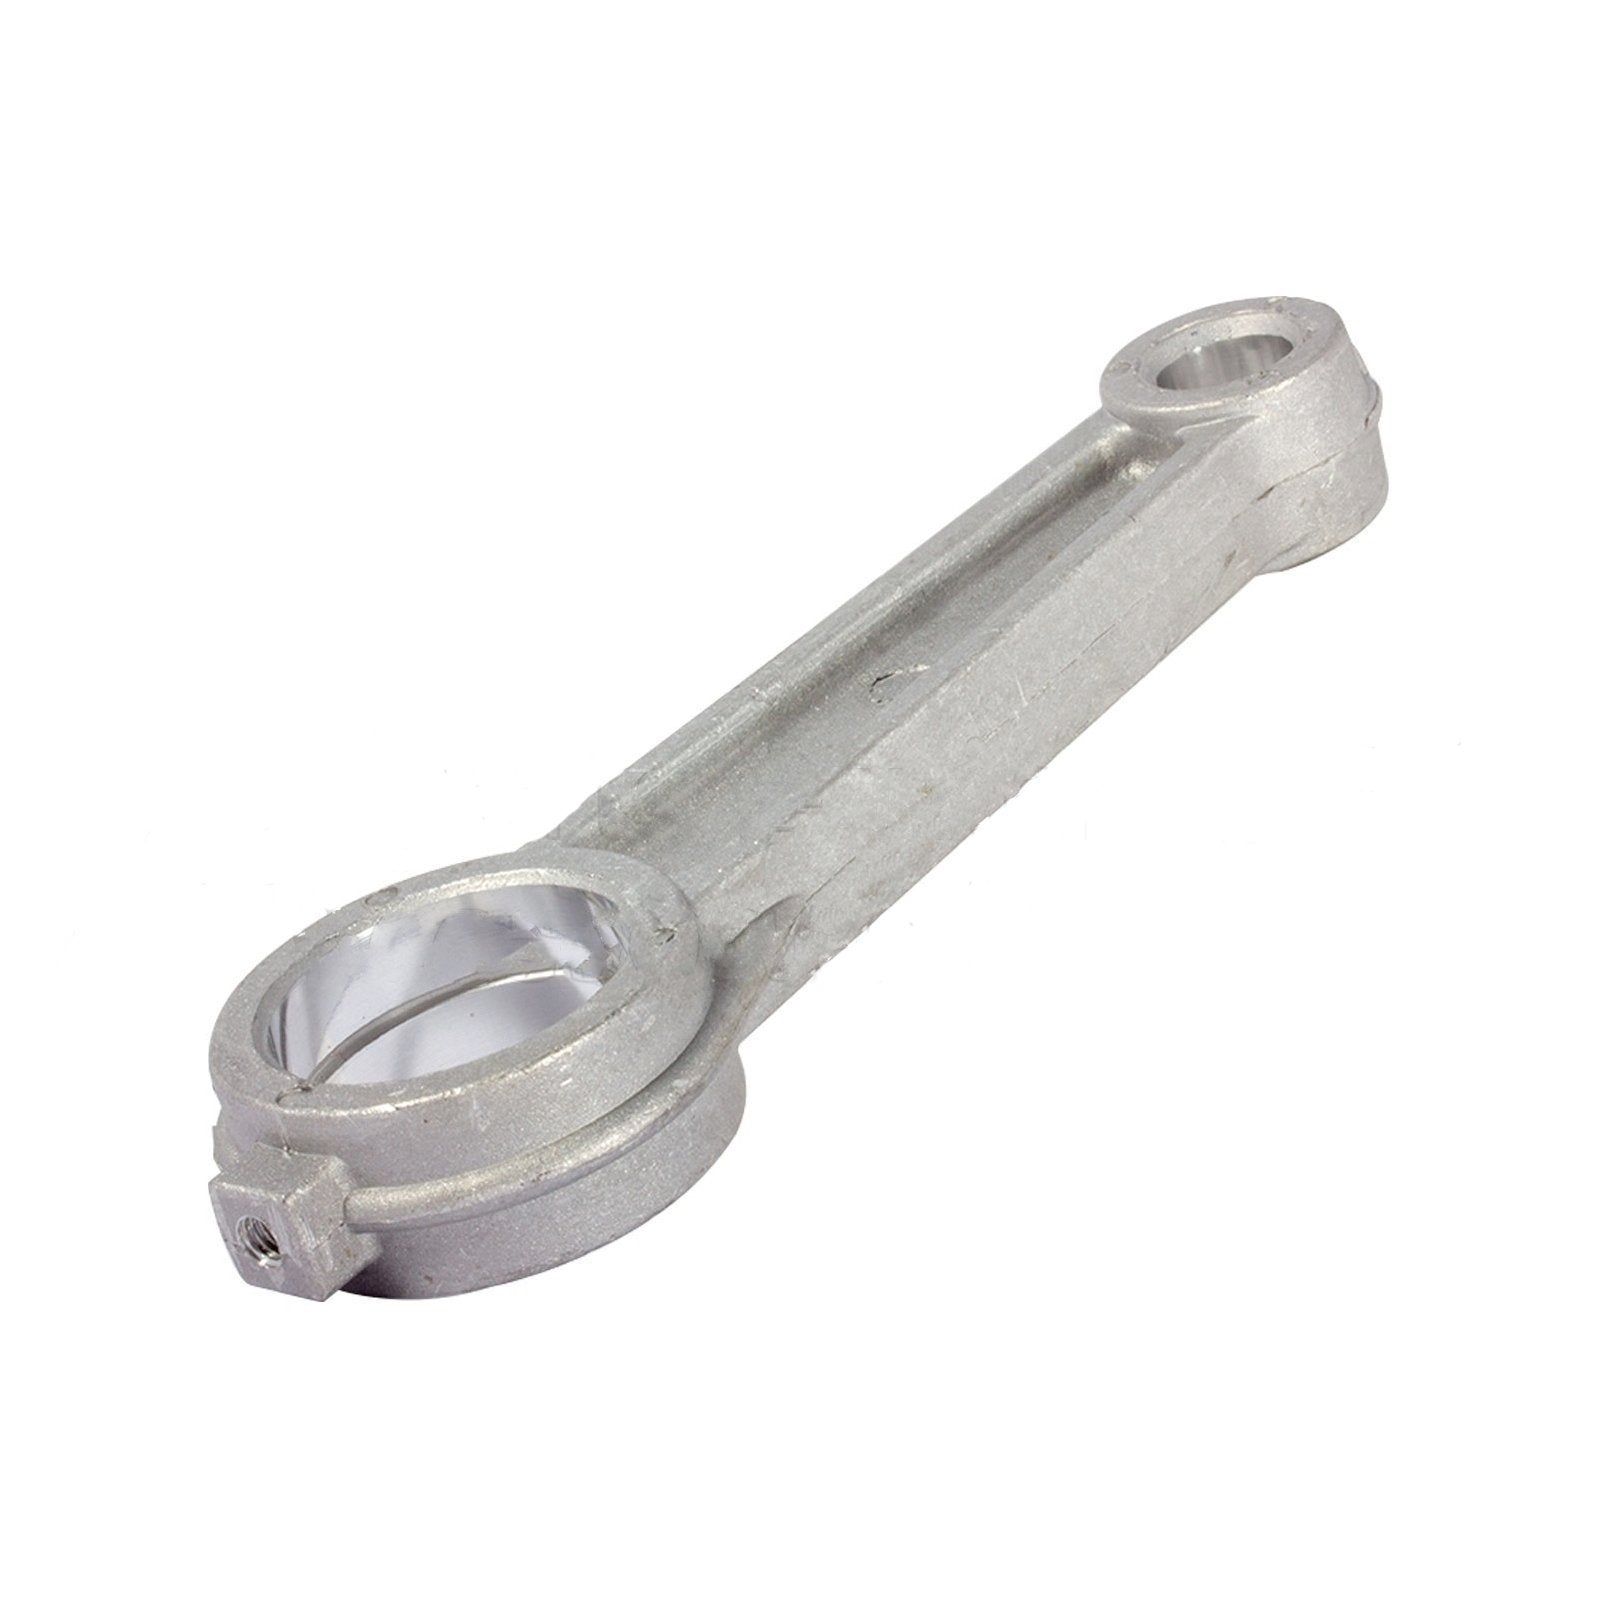 Connecting Rod For Iron Horse, Eagle And Max Air Air Compressors-air compressor parts-Tool Mart Inc.